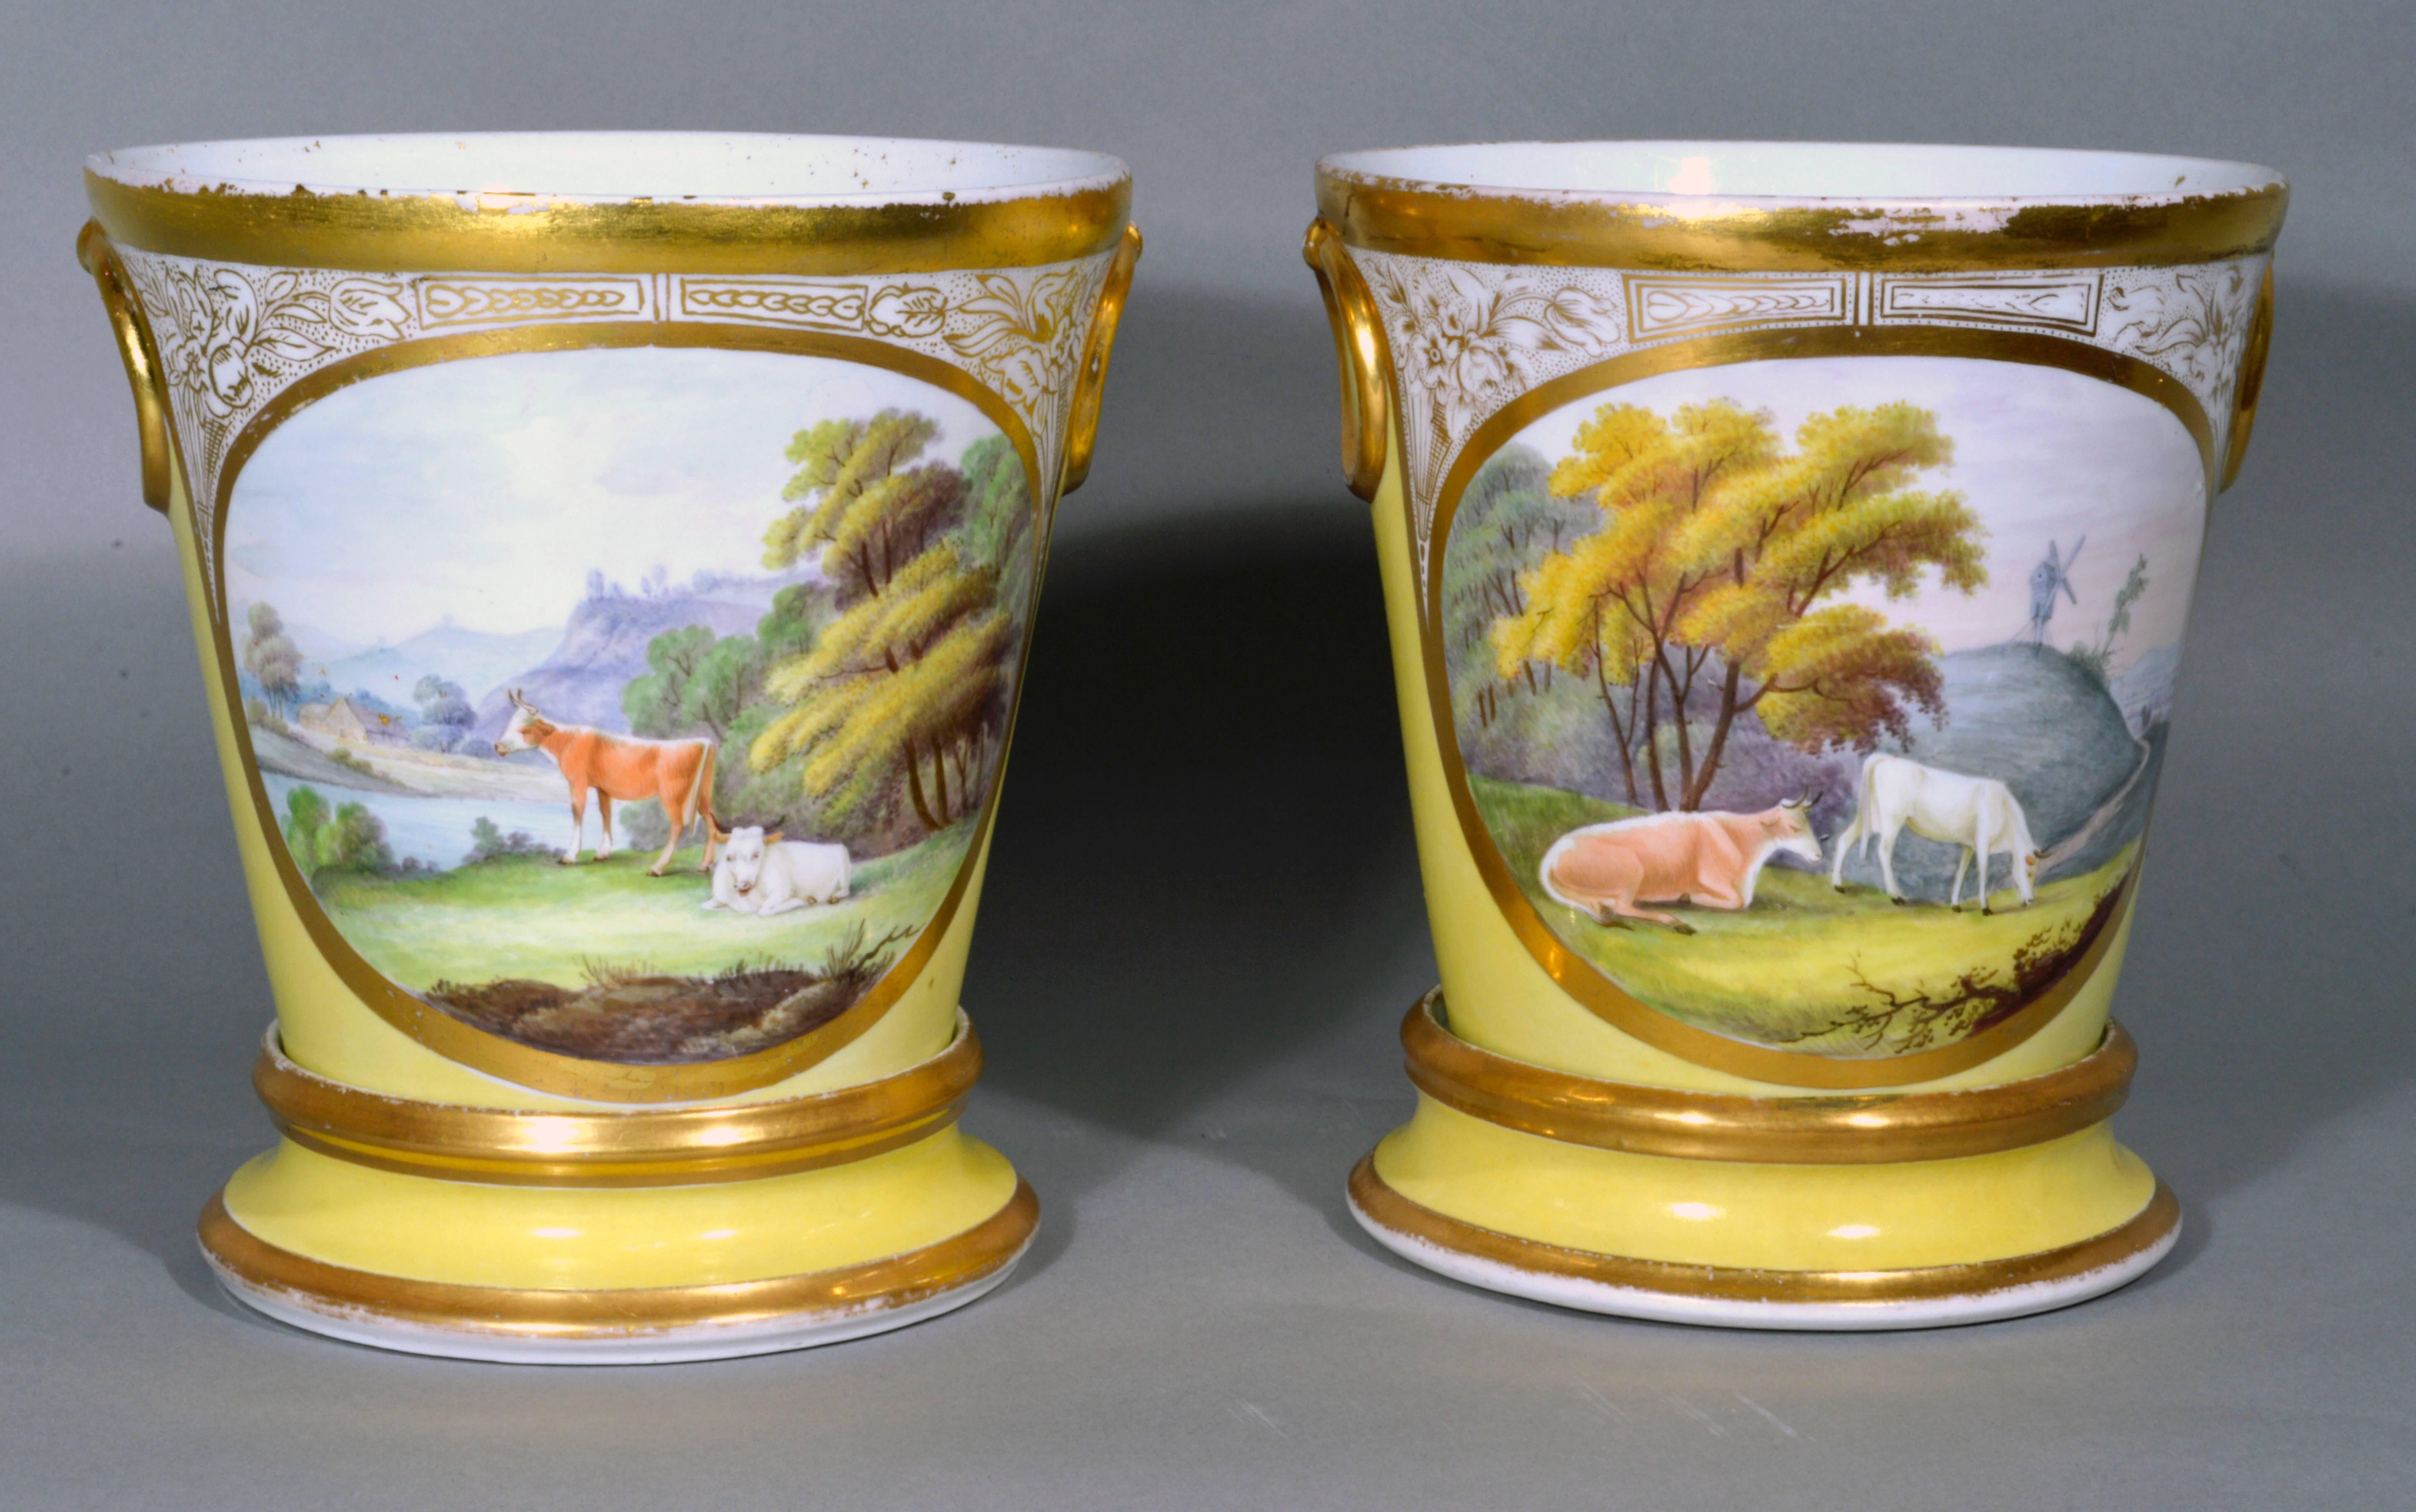 The Coalport Porcelain pair of yellow-ground cache pots and stands each have oval panels to the front with a gilt band and an ornate gilt design of tulips above.  Each panel is painted with bucolic scenes of cattle in landscapes.  In one a windmill